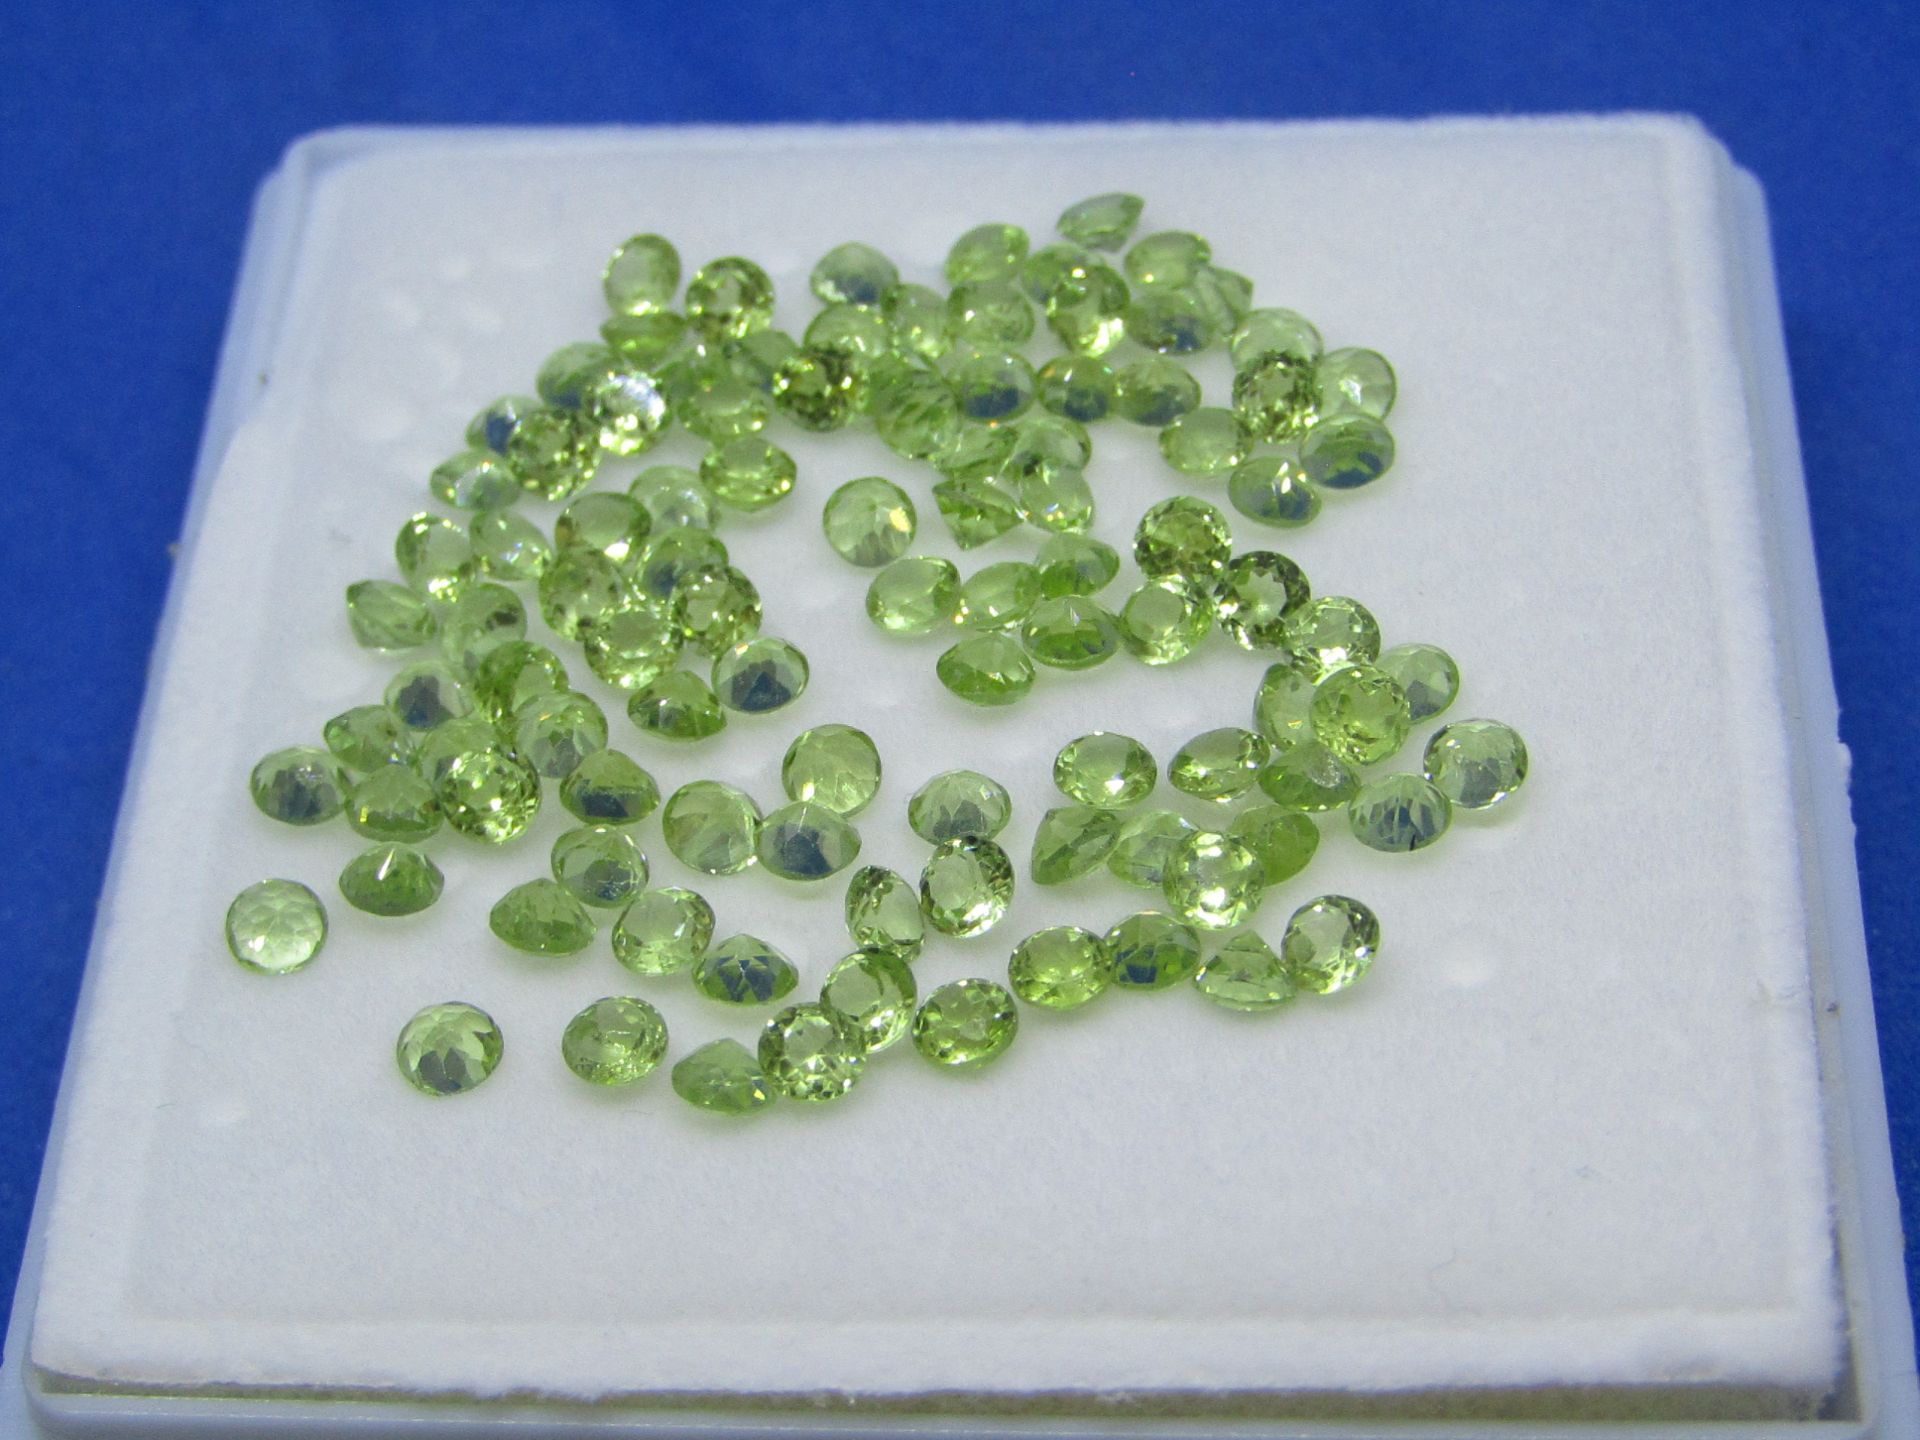 ** NO BUYERS COMMISSION ON THIS LOT ** Natural Peridot 21.70 Carat - 104 Pieces - Brilliant